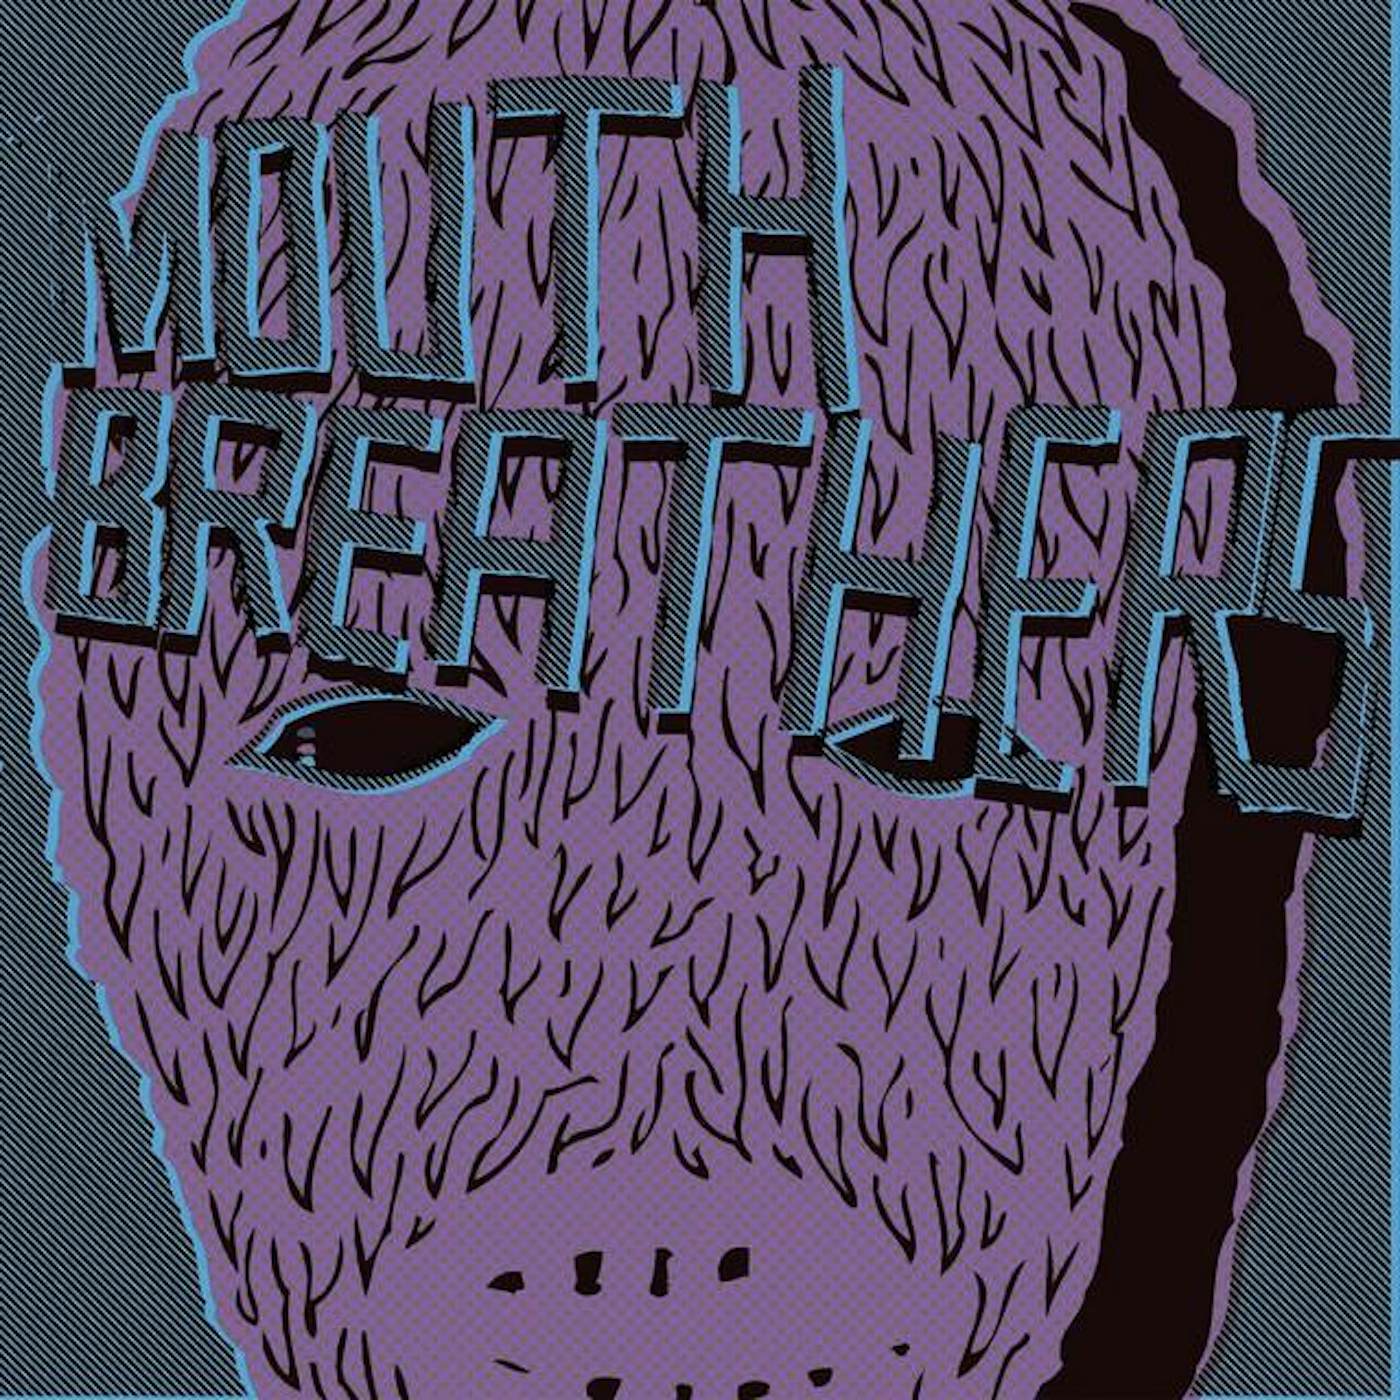 Mouthbreathers